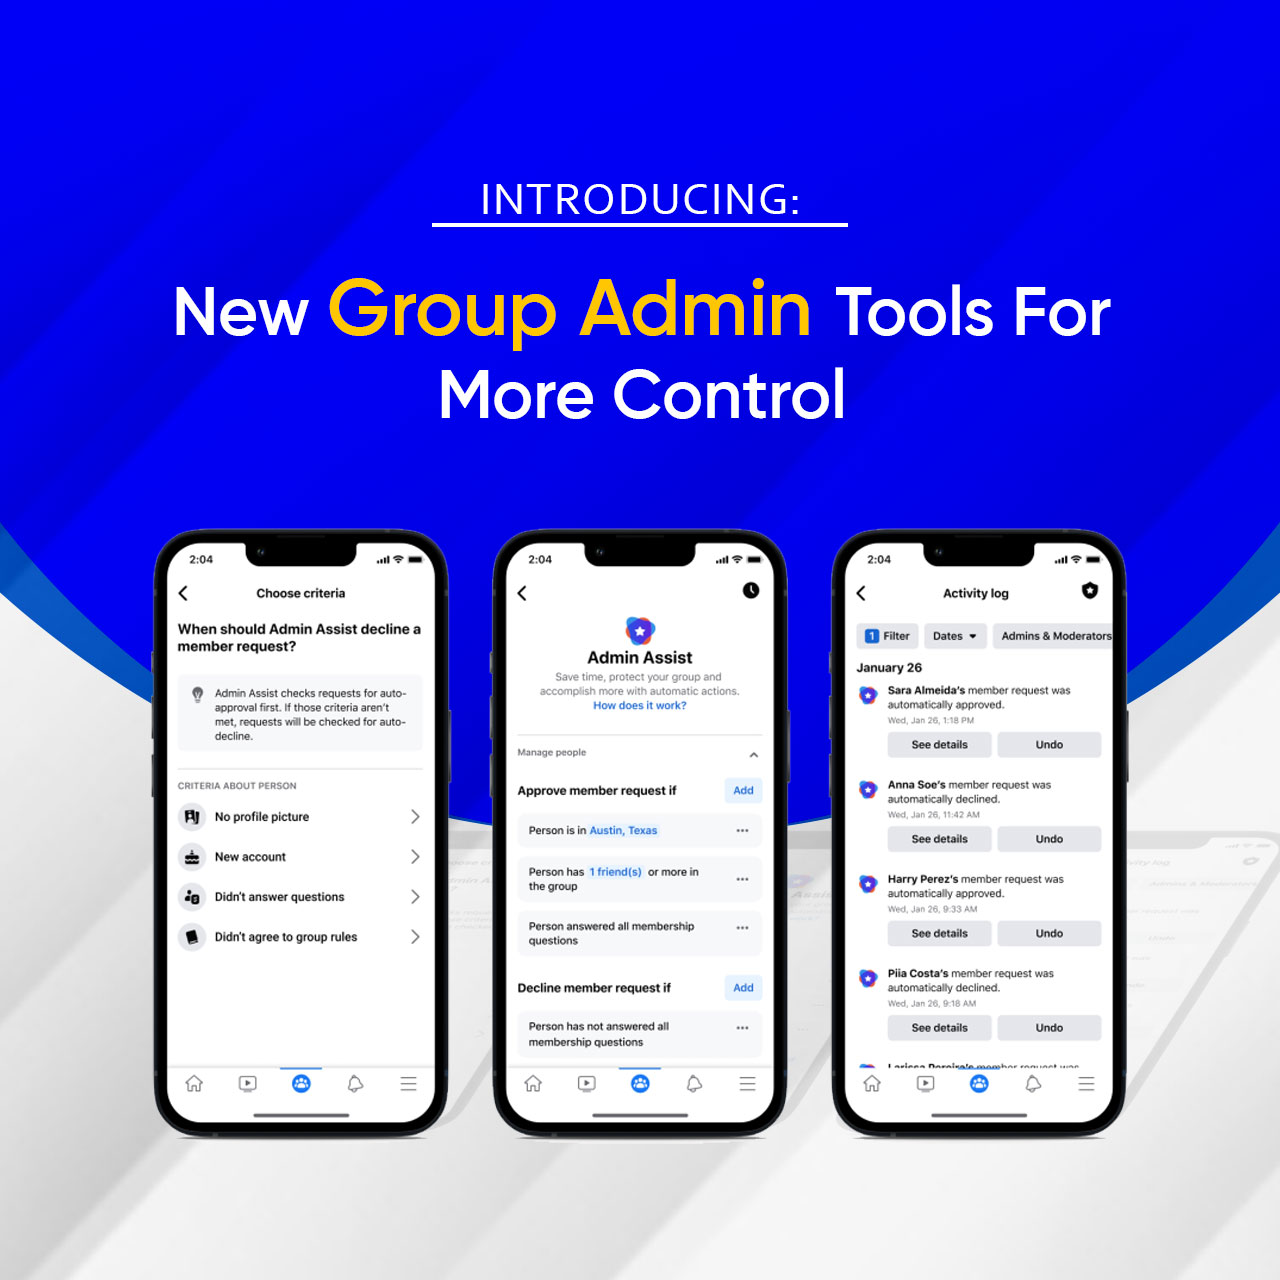 Facebook adds new tools to help Group admins grow and manage communities